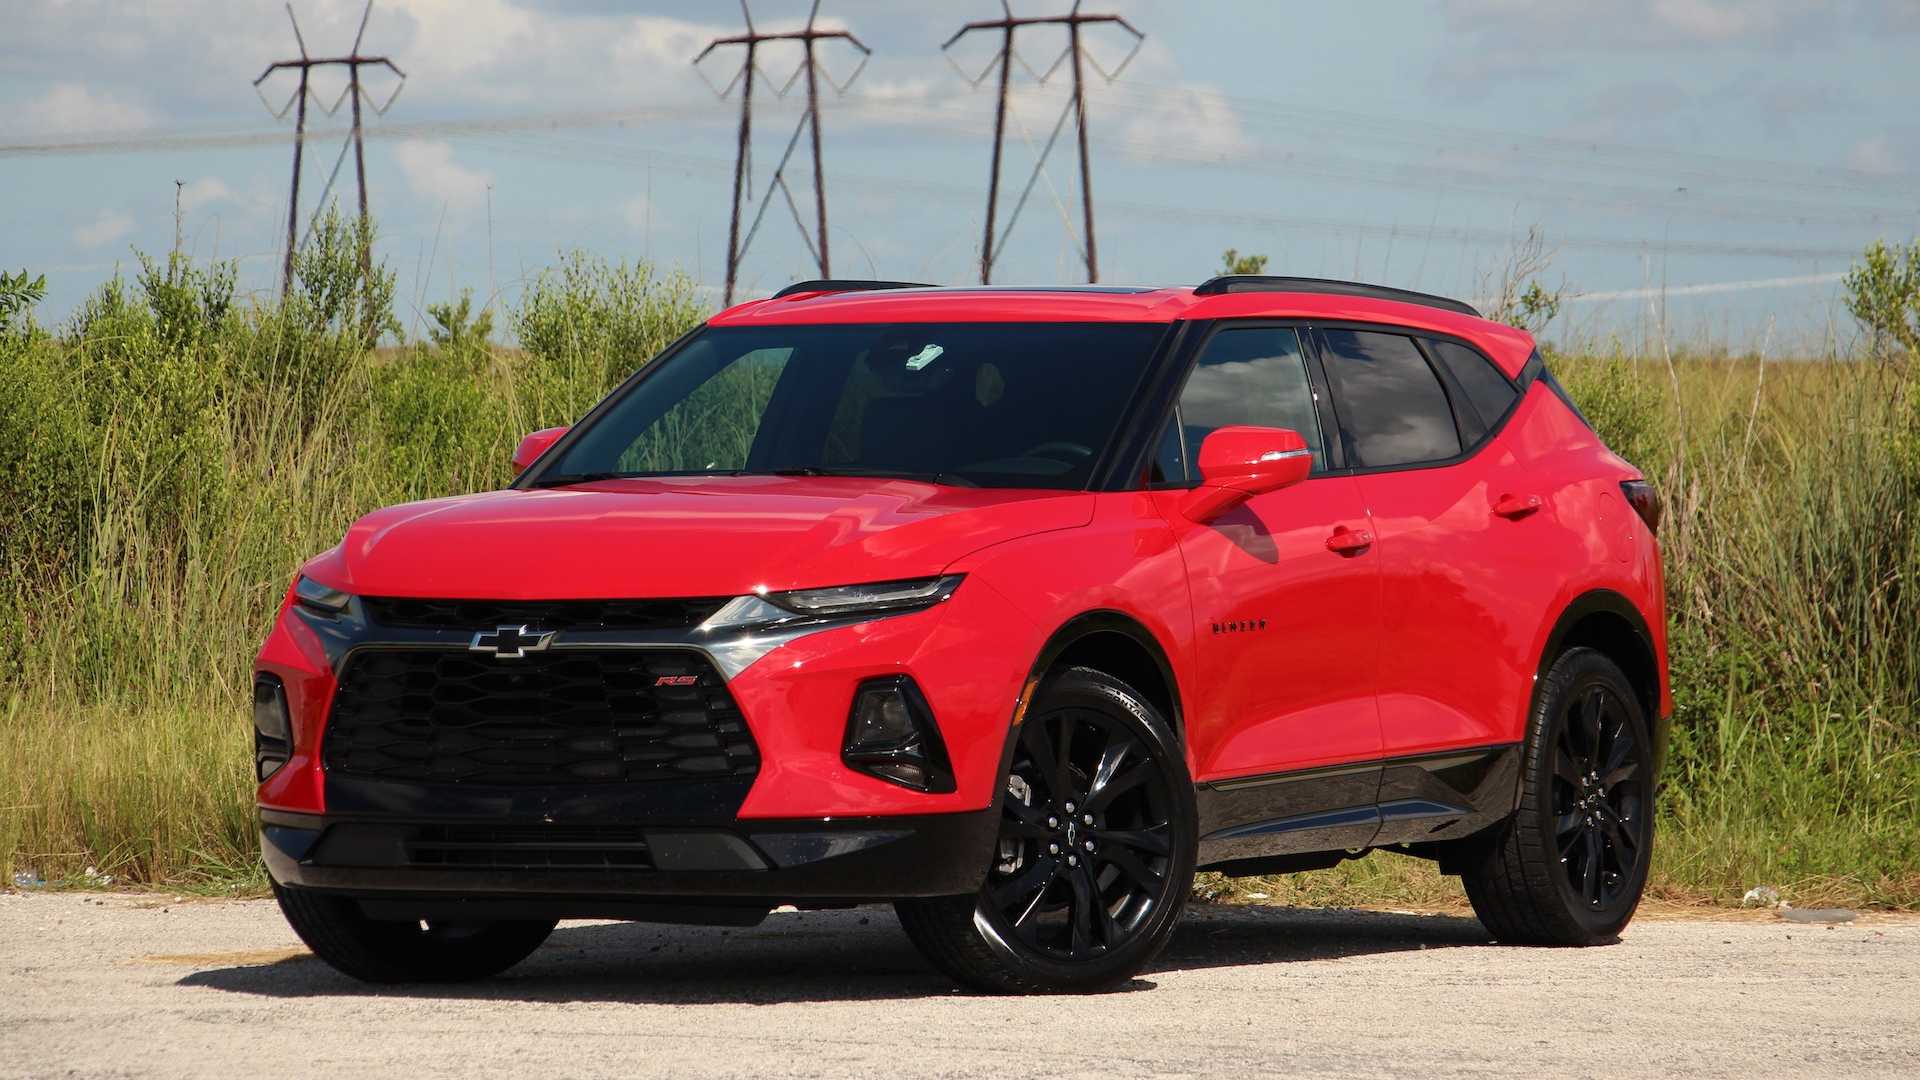 Chevrolet Blazer Rs Wallpapers